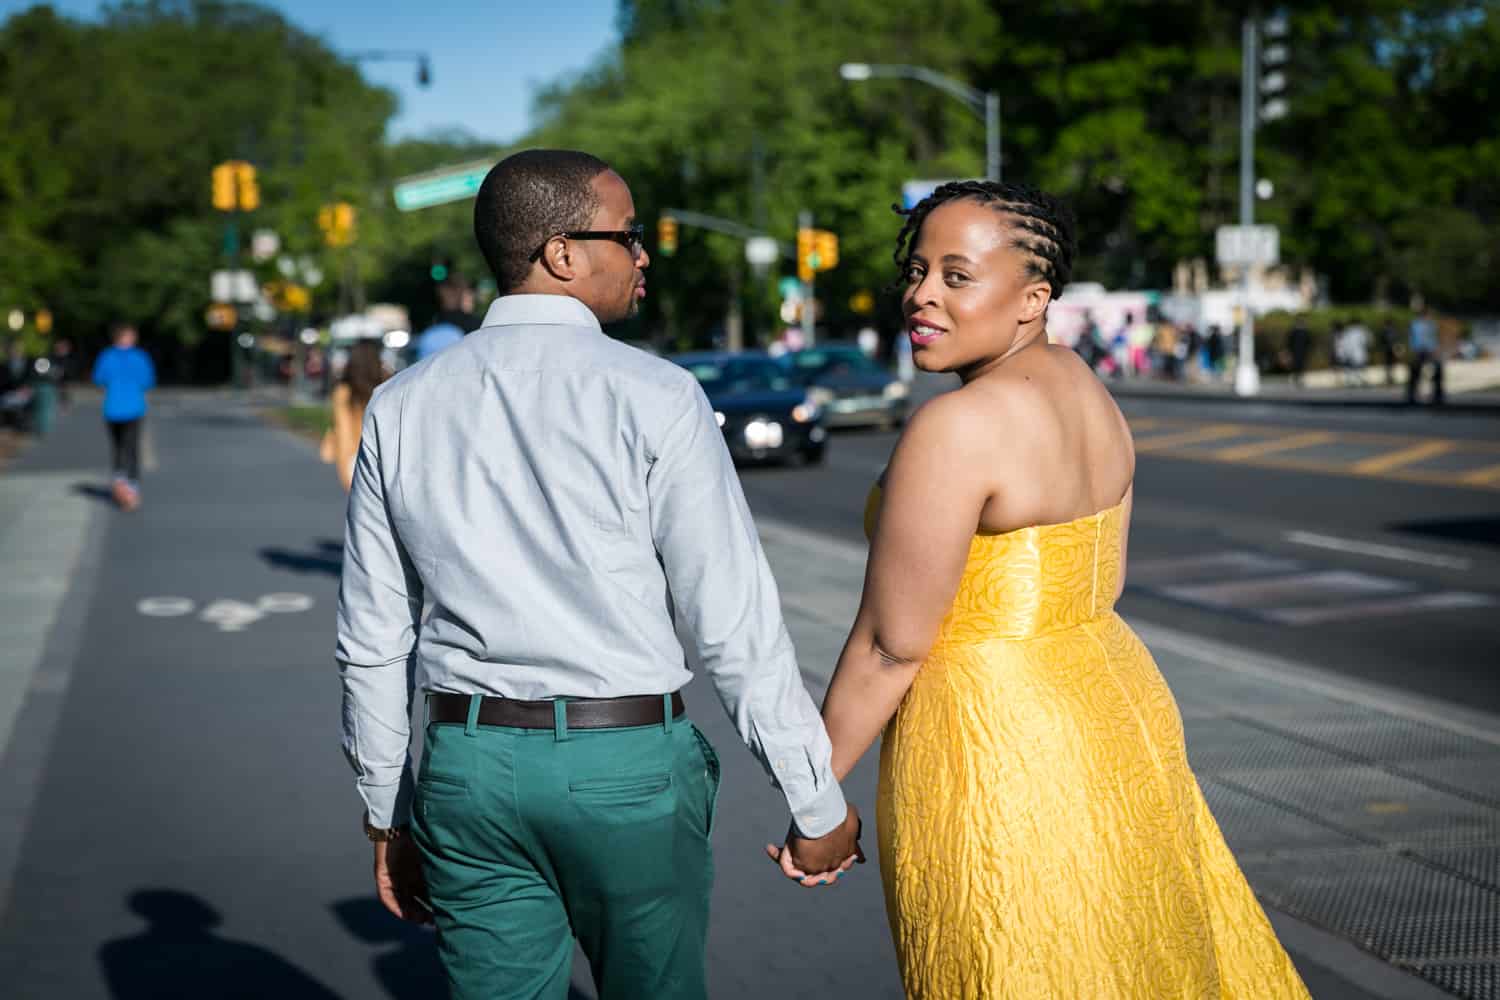 Couple holding hands and walking down sidewalk and woman looking over shoulder